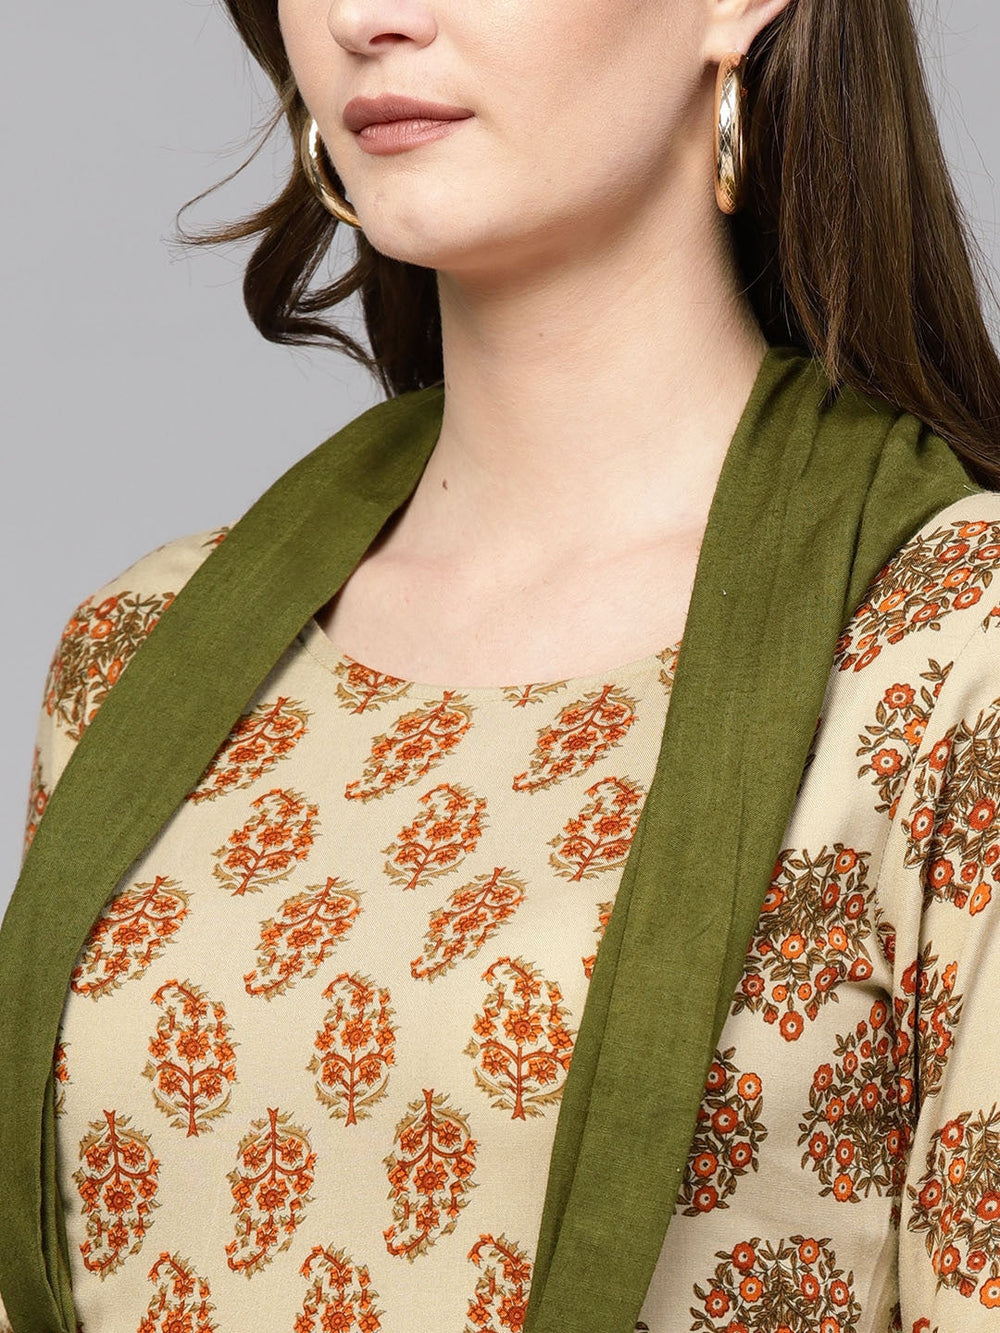 Beige & Olive Green A-Line Kurta with an Attached Draped-Yufta Store-DBNKU1649S